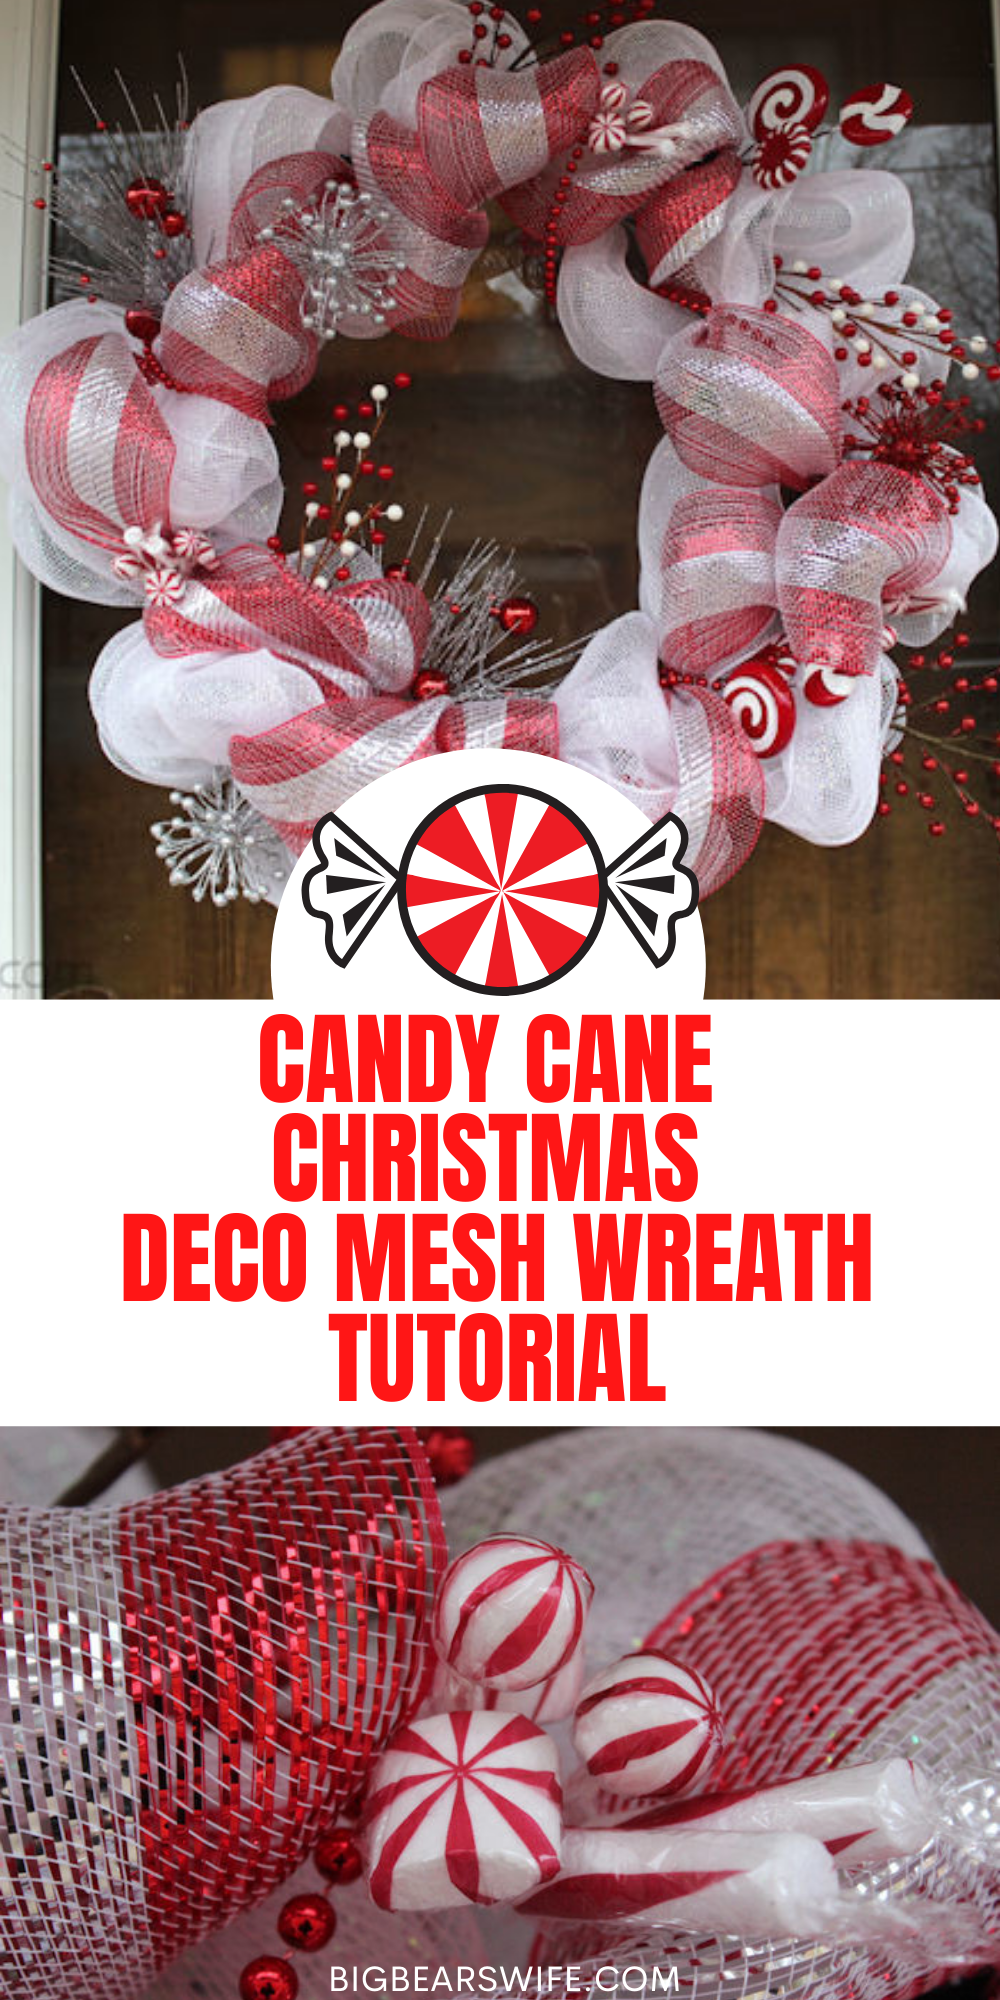 Candy Cane Christmas Deco Mesh Wreath - the perfect winter/Christmas Deco mesh Wreath - Plus a link to my step by step Deco Mesh Tutorial!!  Learn how to make this beautiful Candy Cane Christmas Deco Mesh Wreath for your home with this easy Candy Cane Christmas Deco Mesh Wreath Tutorial! via @bigbearswife